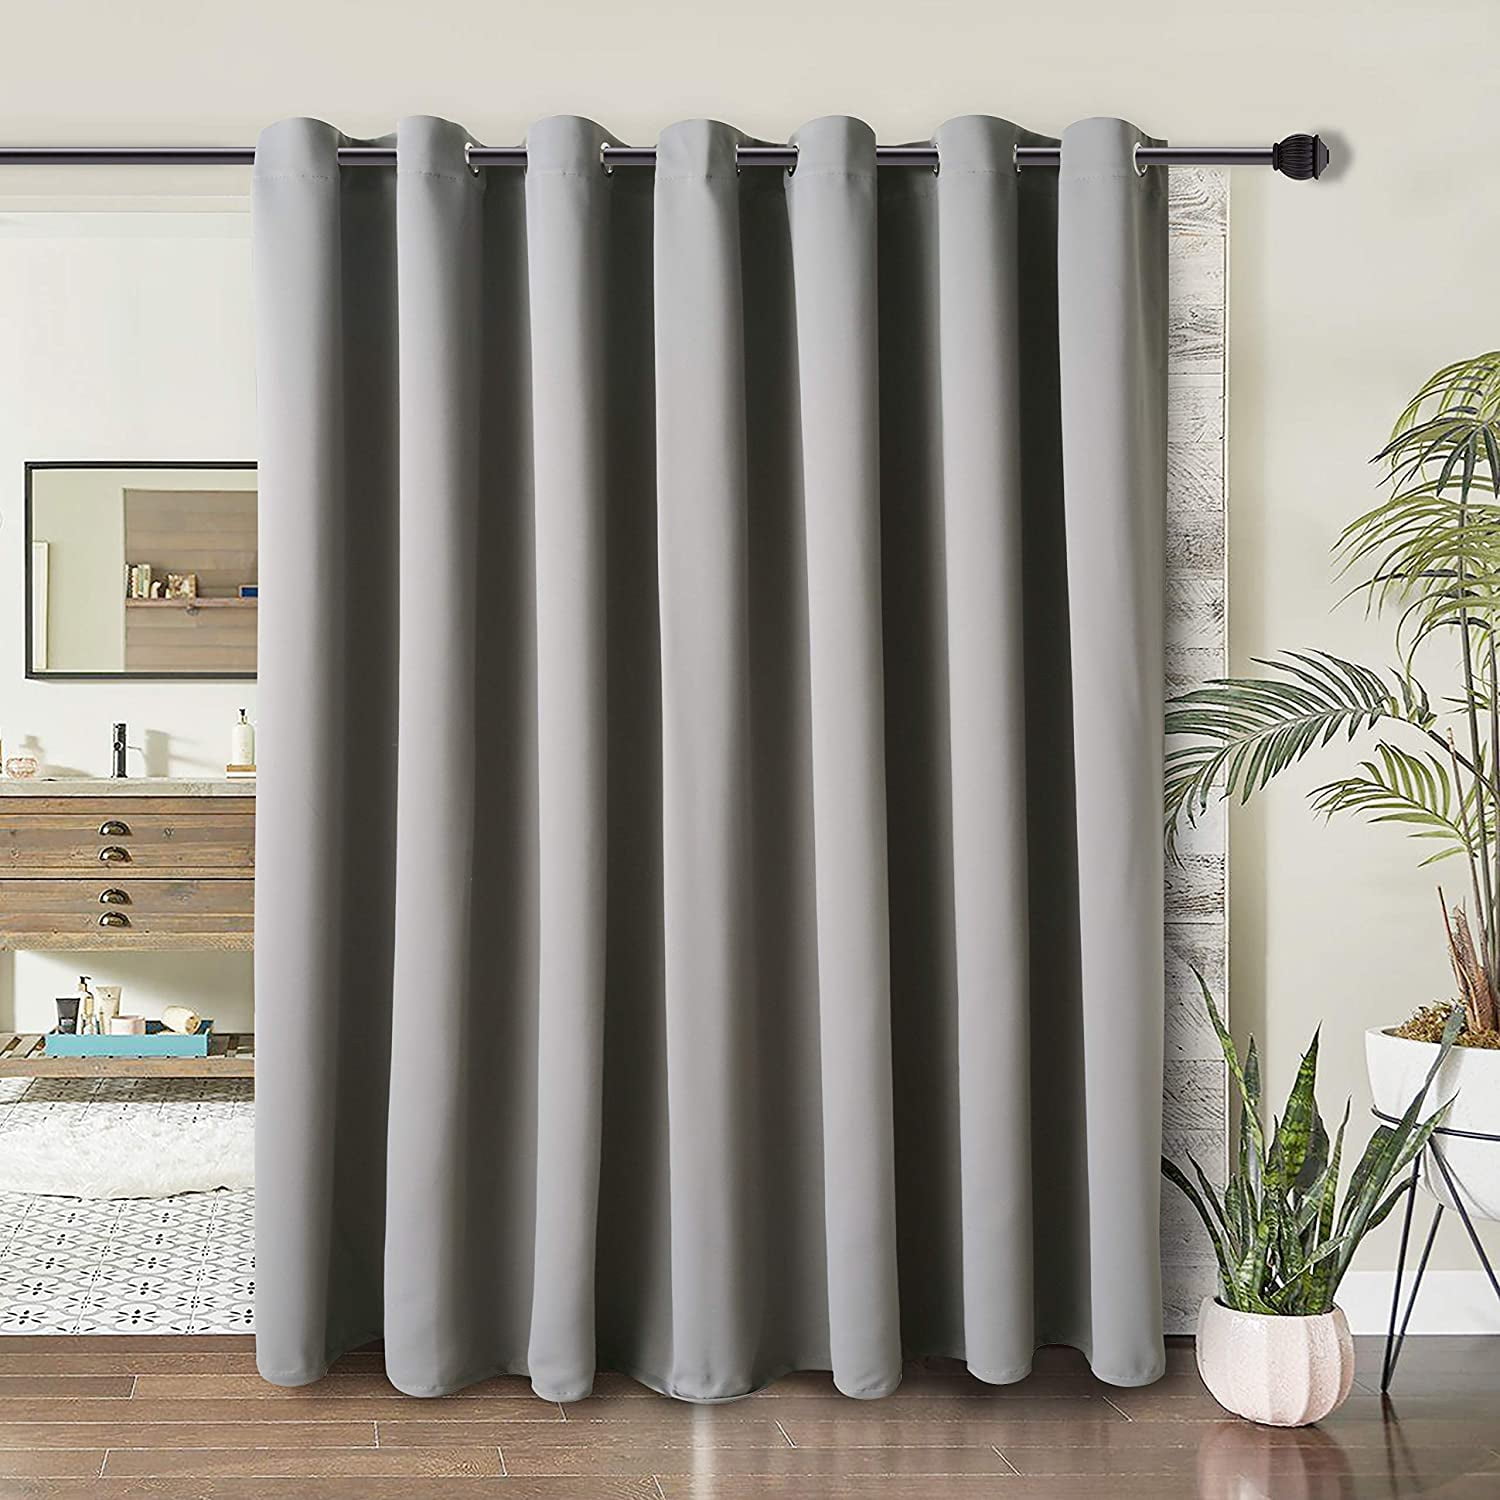 Details about   Linen 100% Blackout Curtains Bedroom Window Waterproof Curtains Living Room 